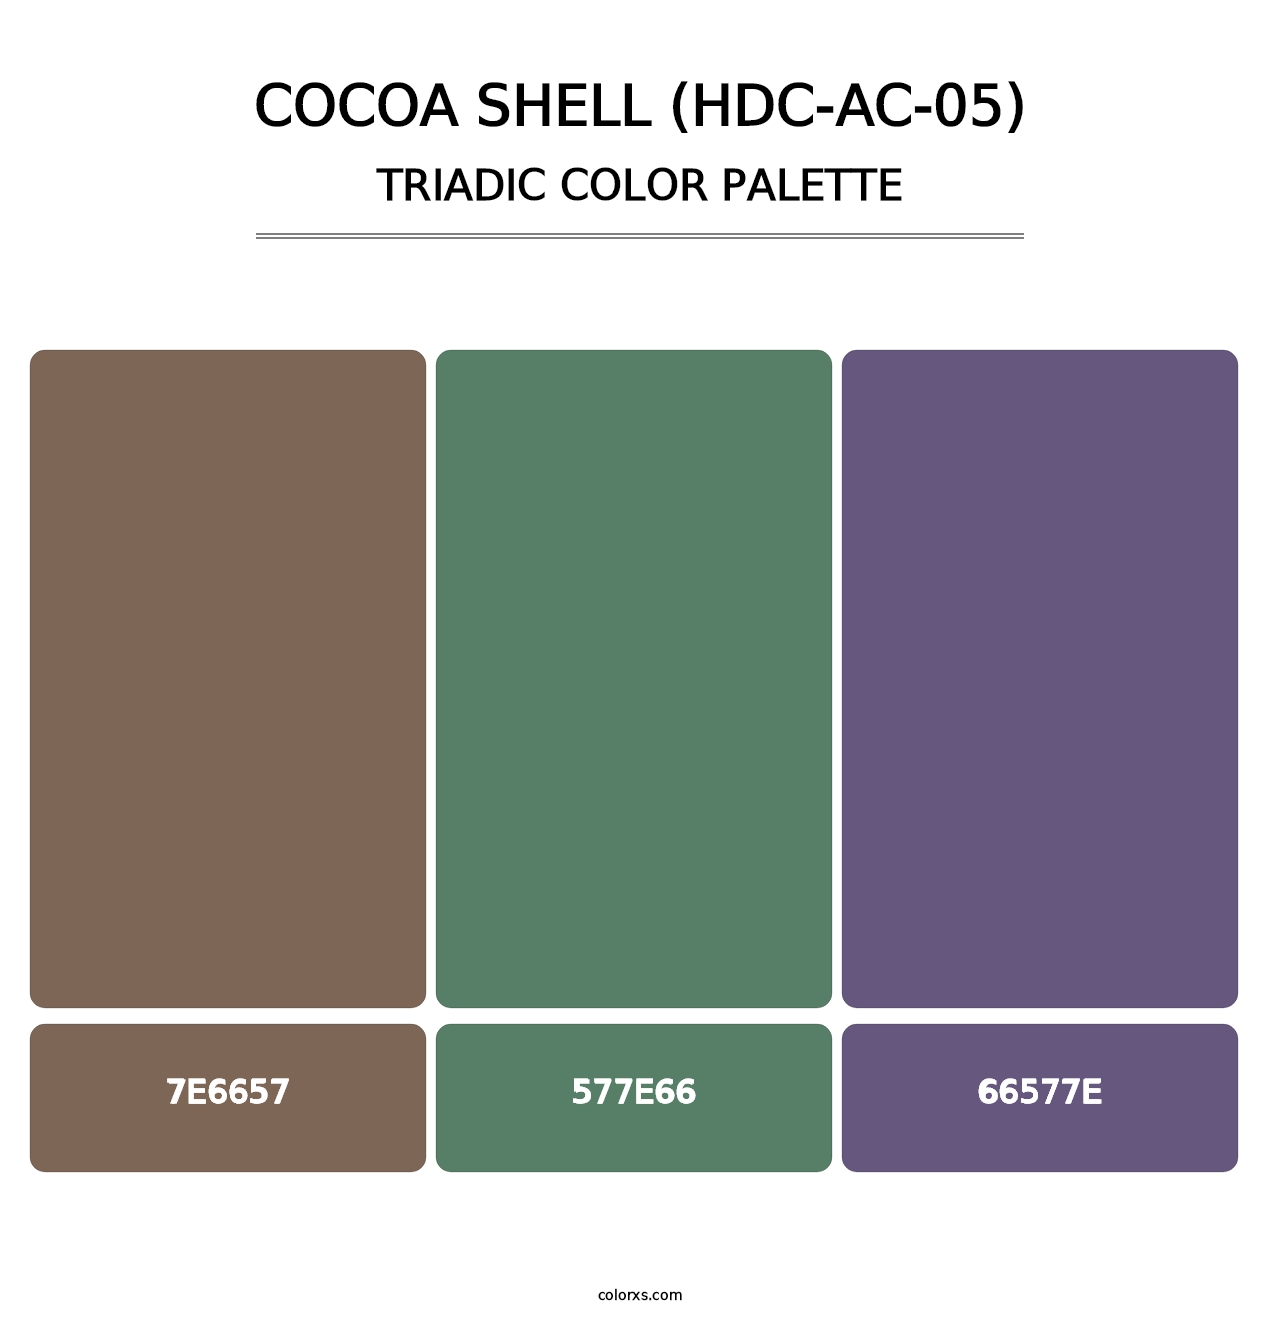 Cocoa Shell (HDC-AC-05) - Triadic Color Palette